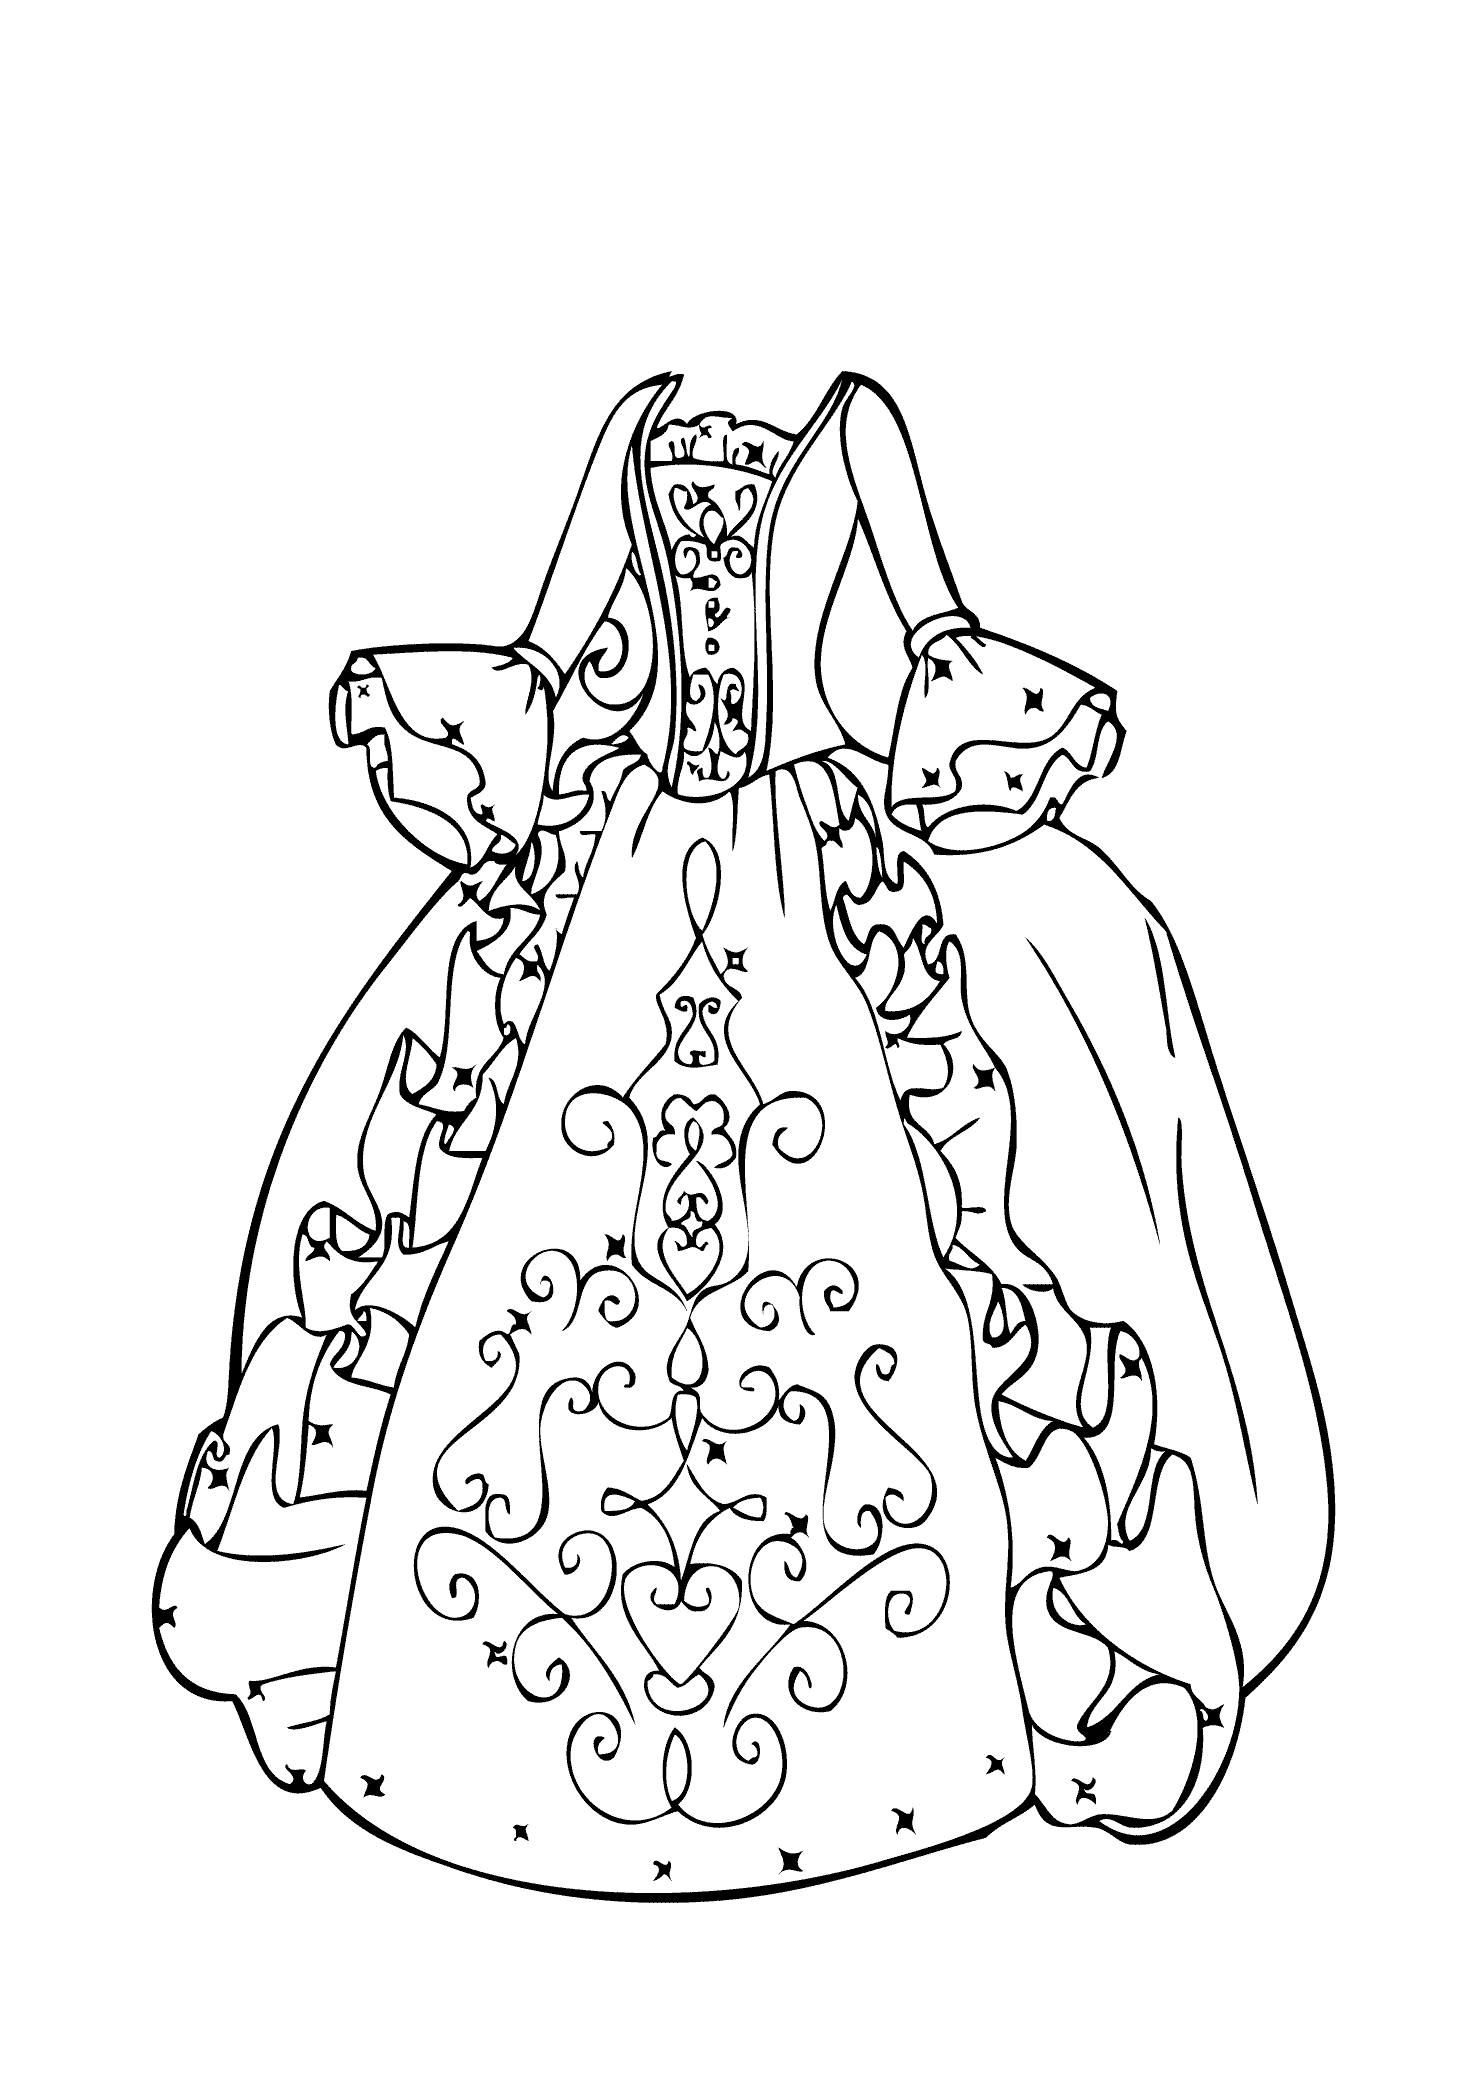 Ball Gown Coloring Page